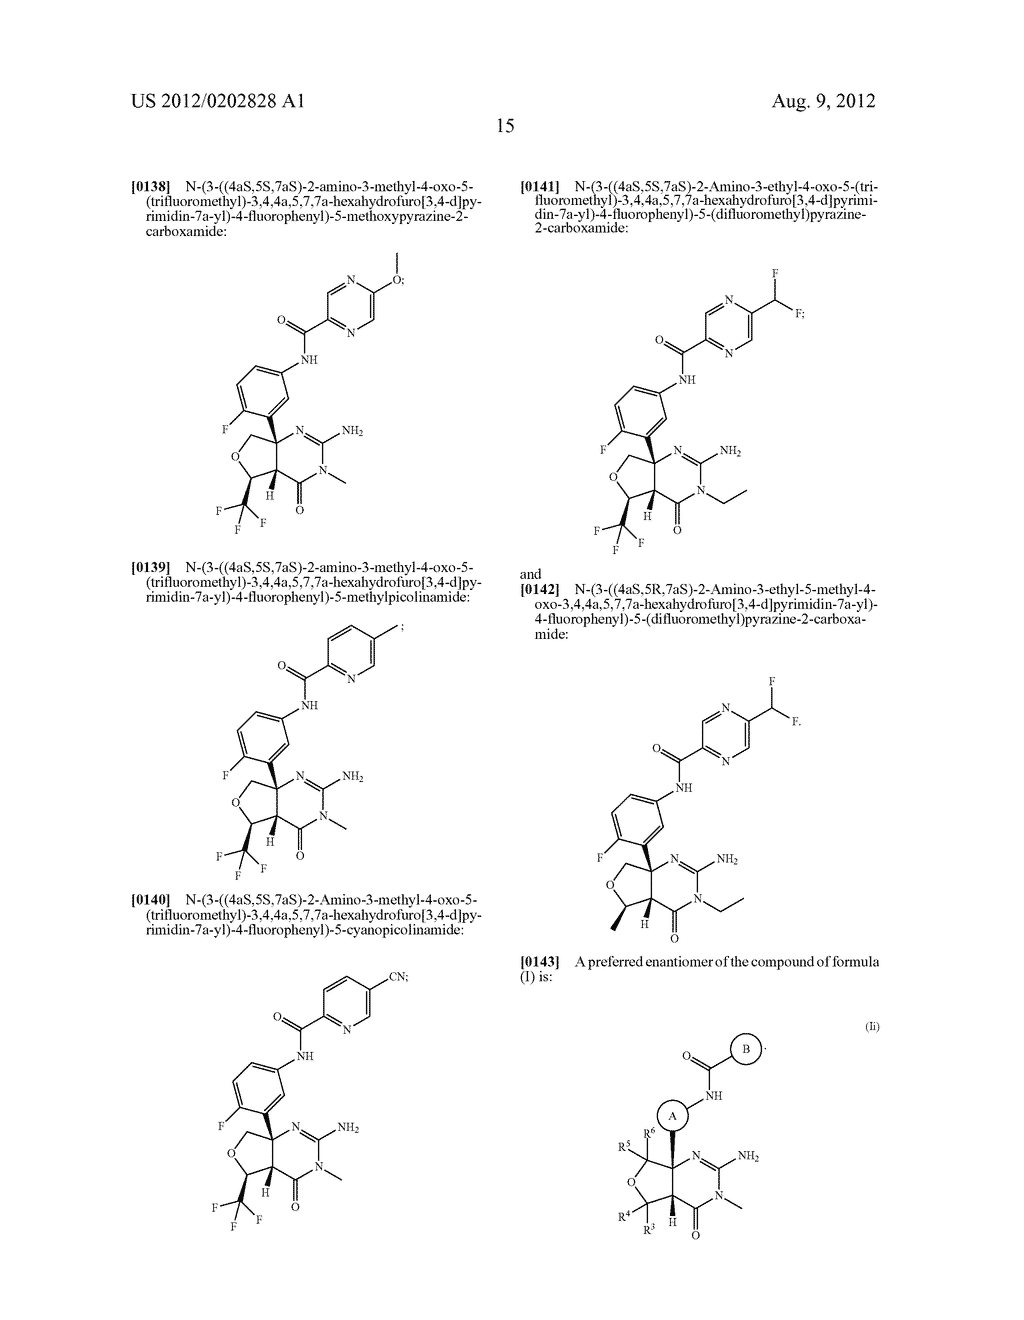 FUSED AMINODIHYDROPYRIMIDONE DERIVATIVES - diagram, schematic, and image 16